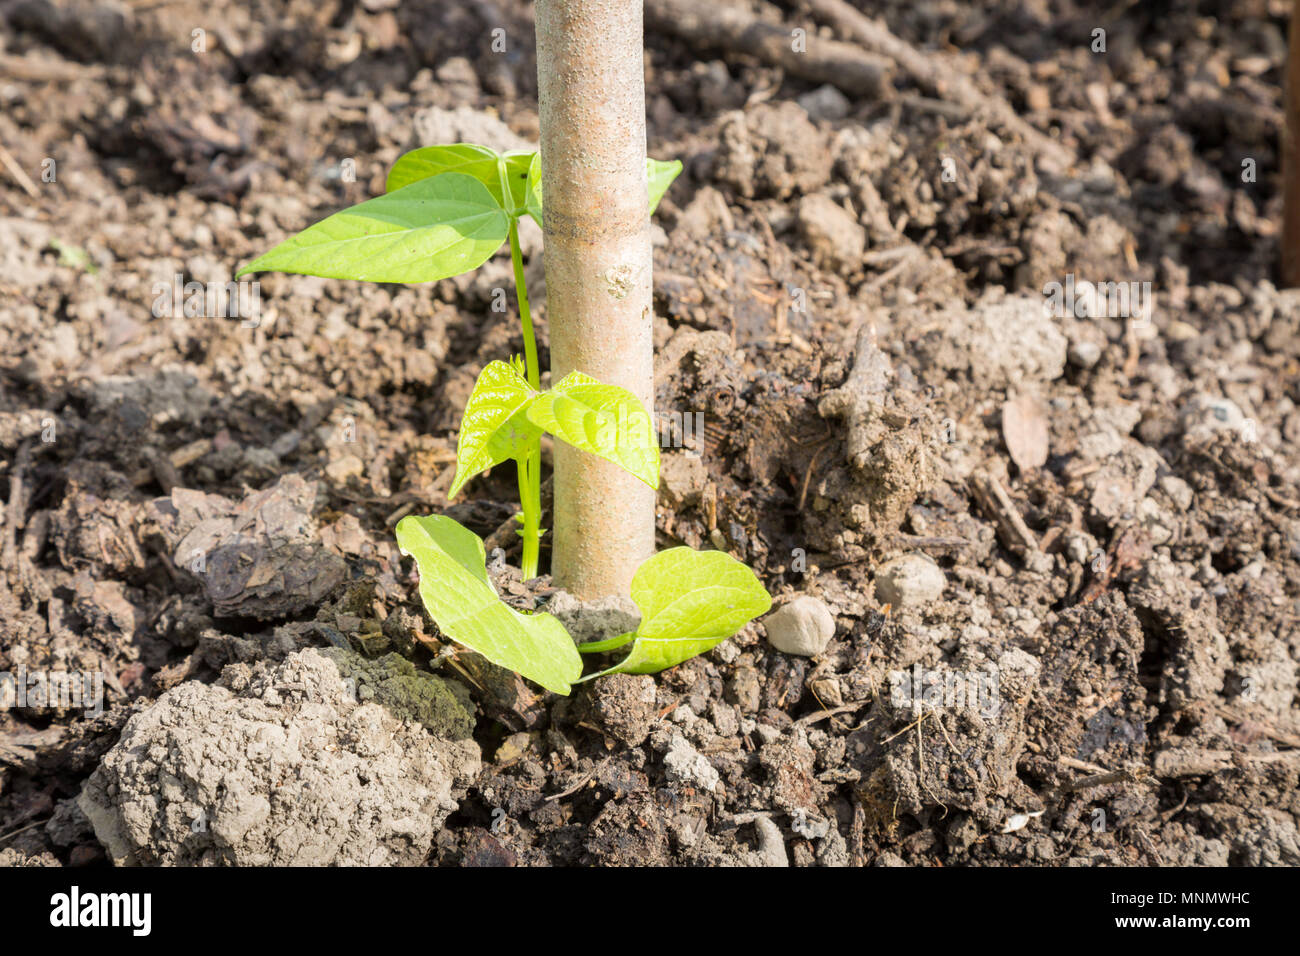 Young runner bean plant growing up a stake or pole Stock Photo